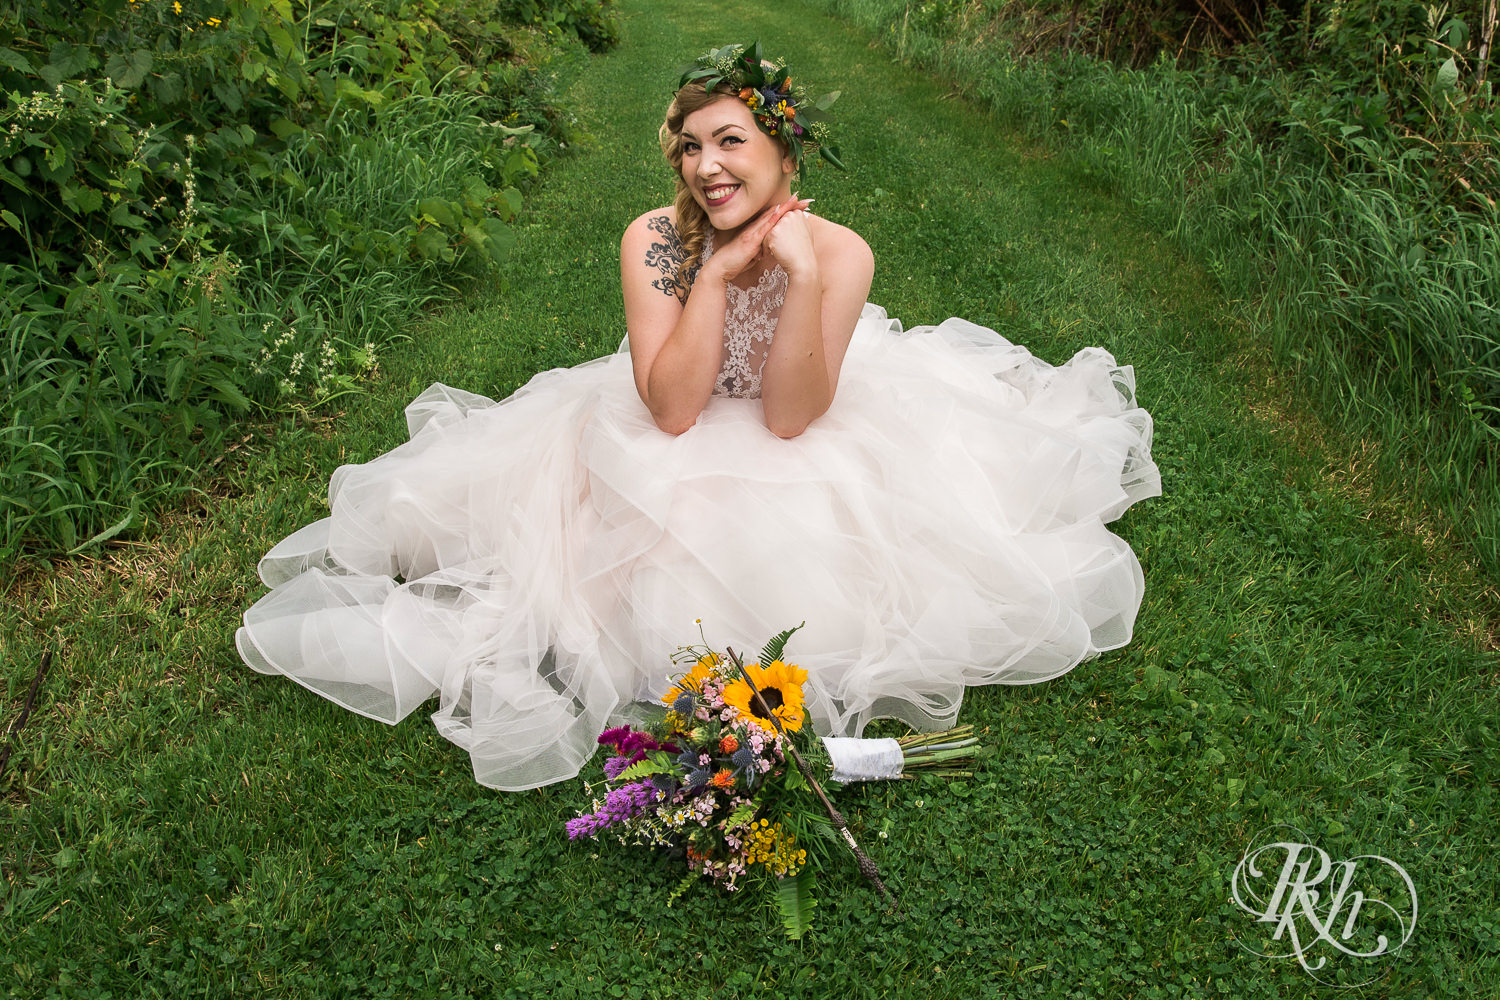 Bride smiles before wedding at Coops Event Barn in Dodge Center, Minnesota.